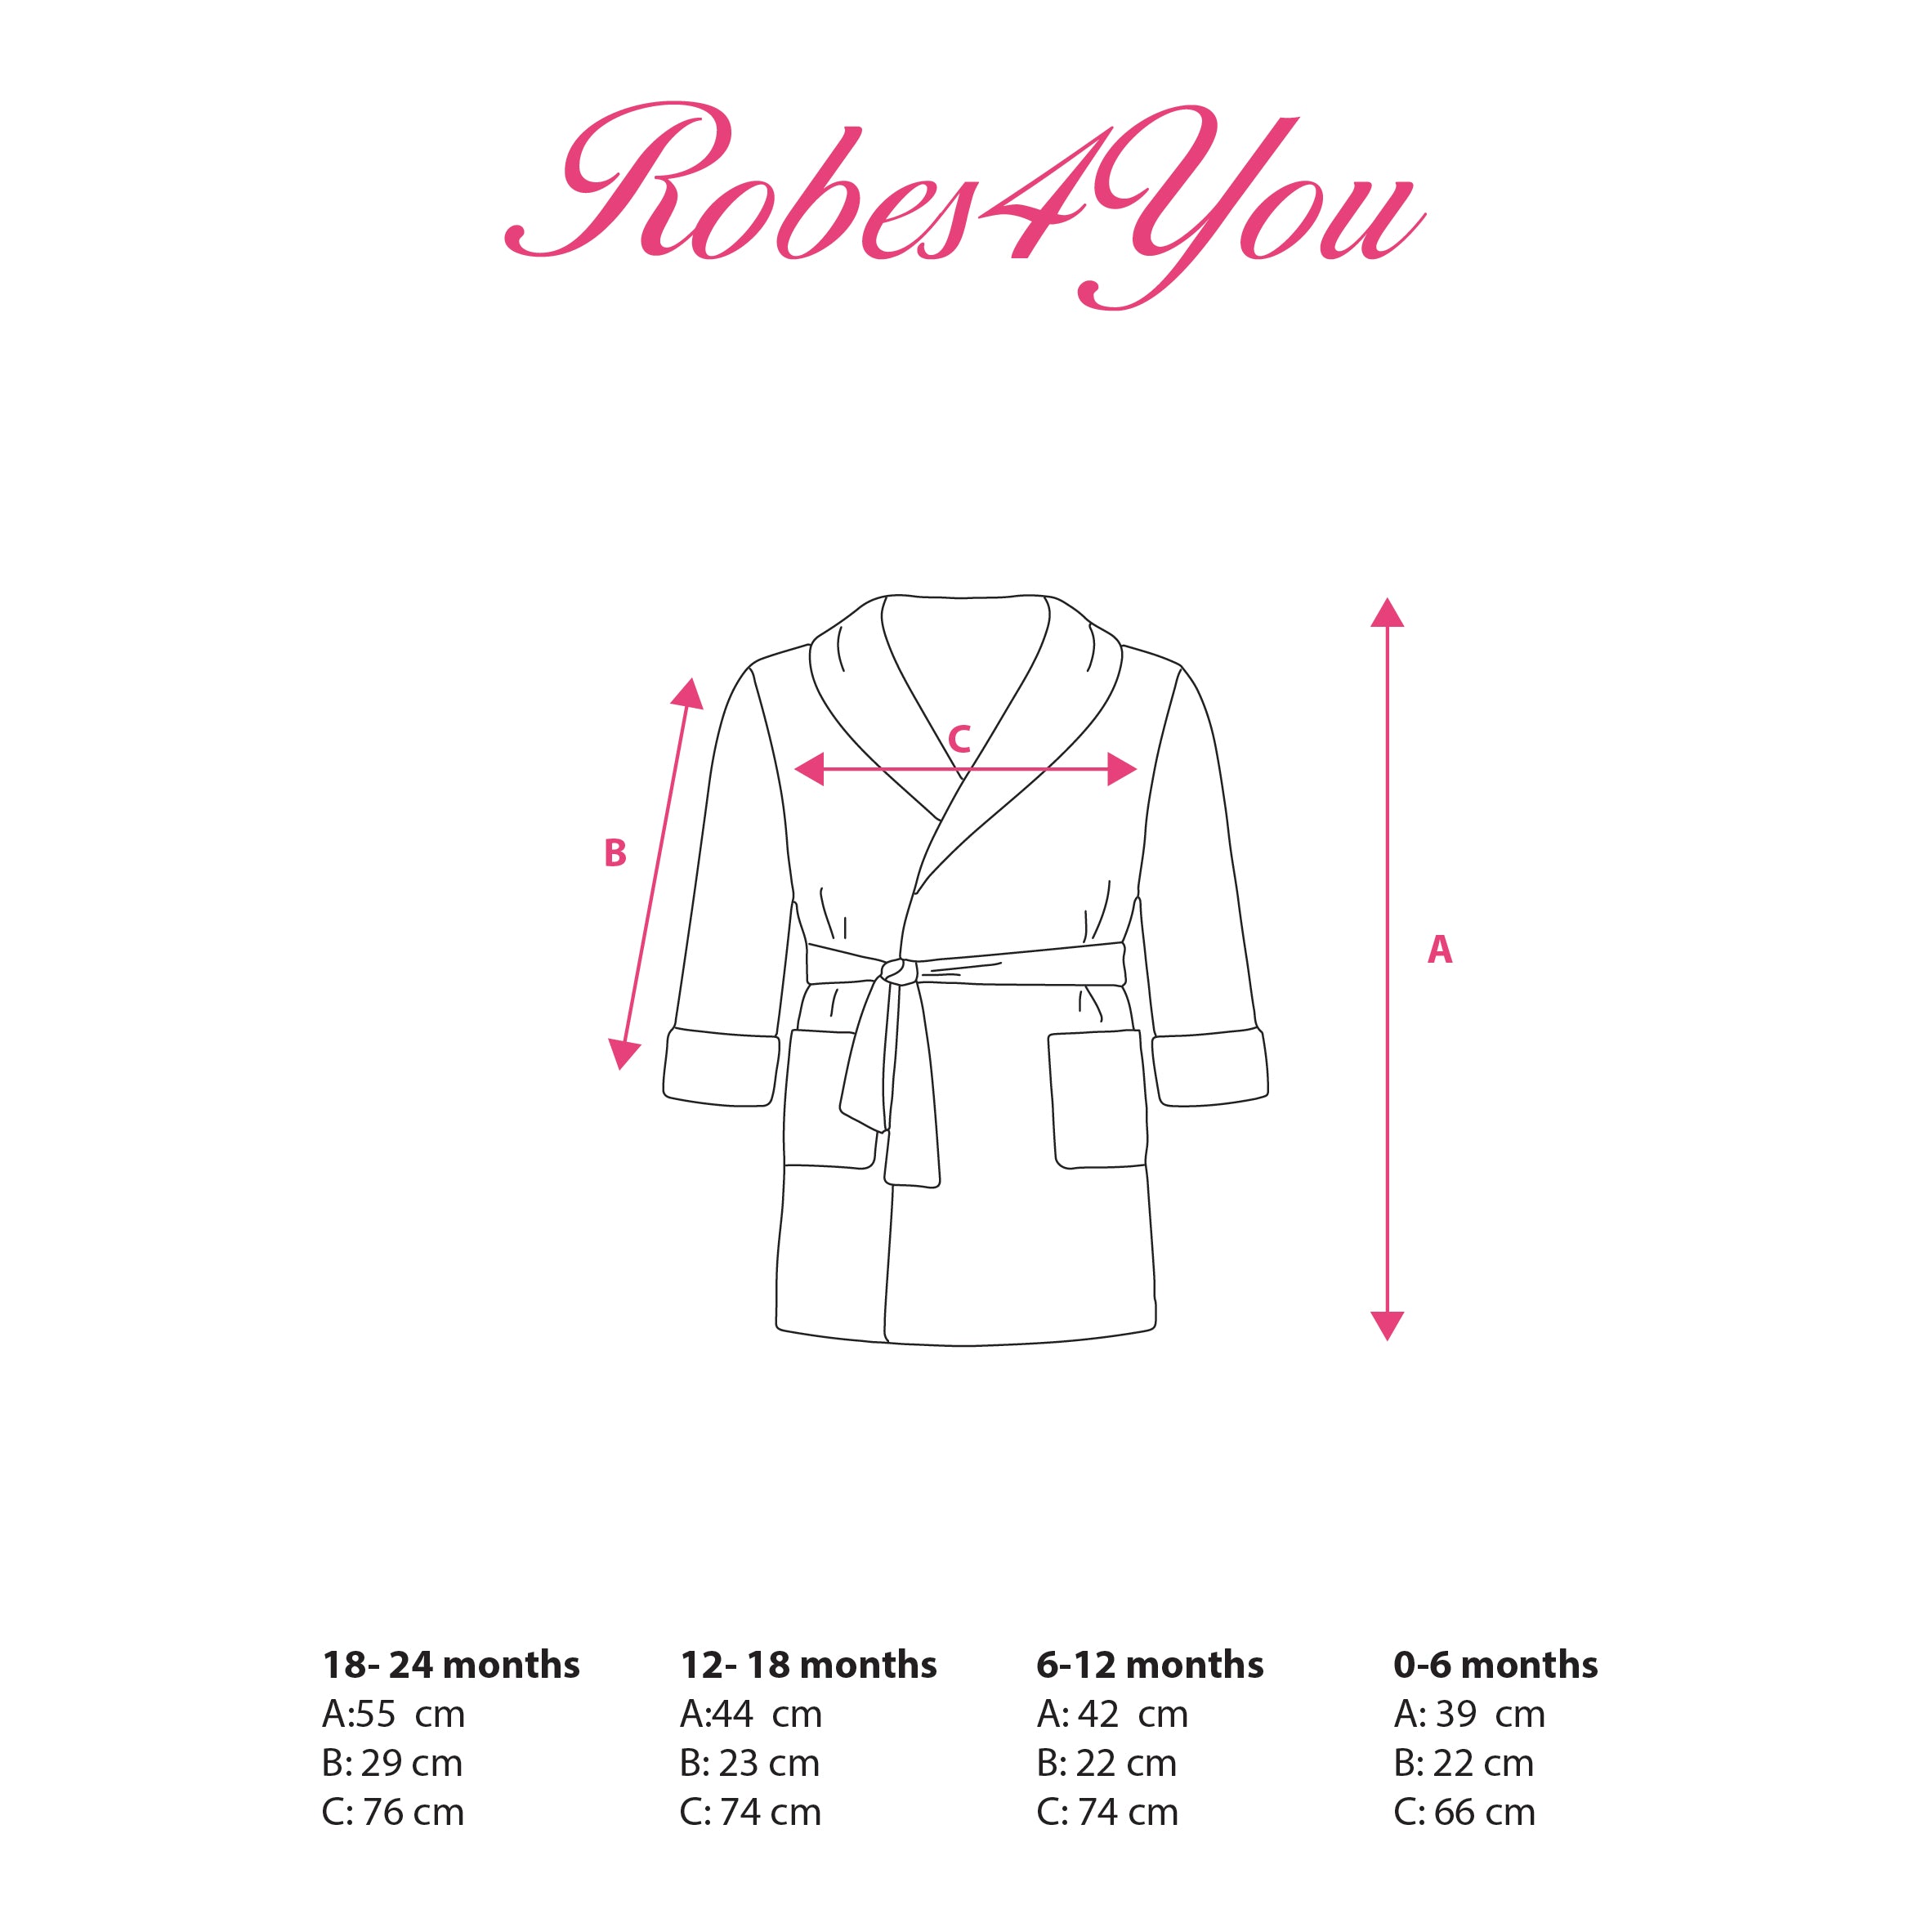 Robes4you sizing 